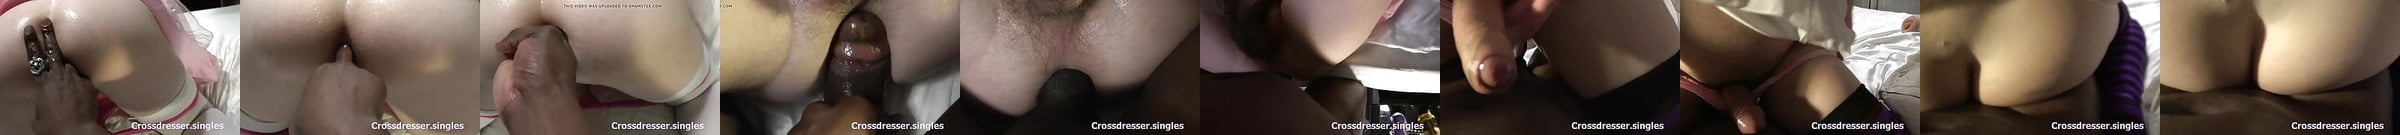 Featured Cum In Condom Shemale Porn Videos 3 Xhamster